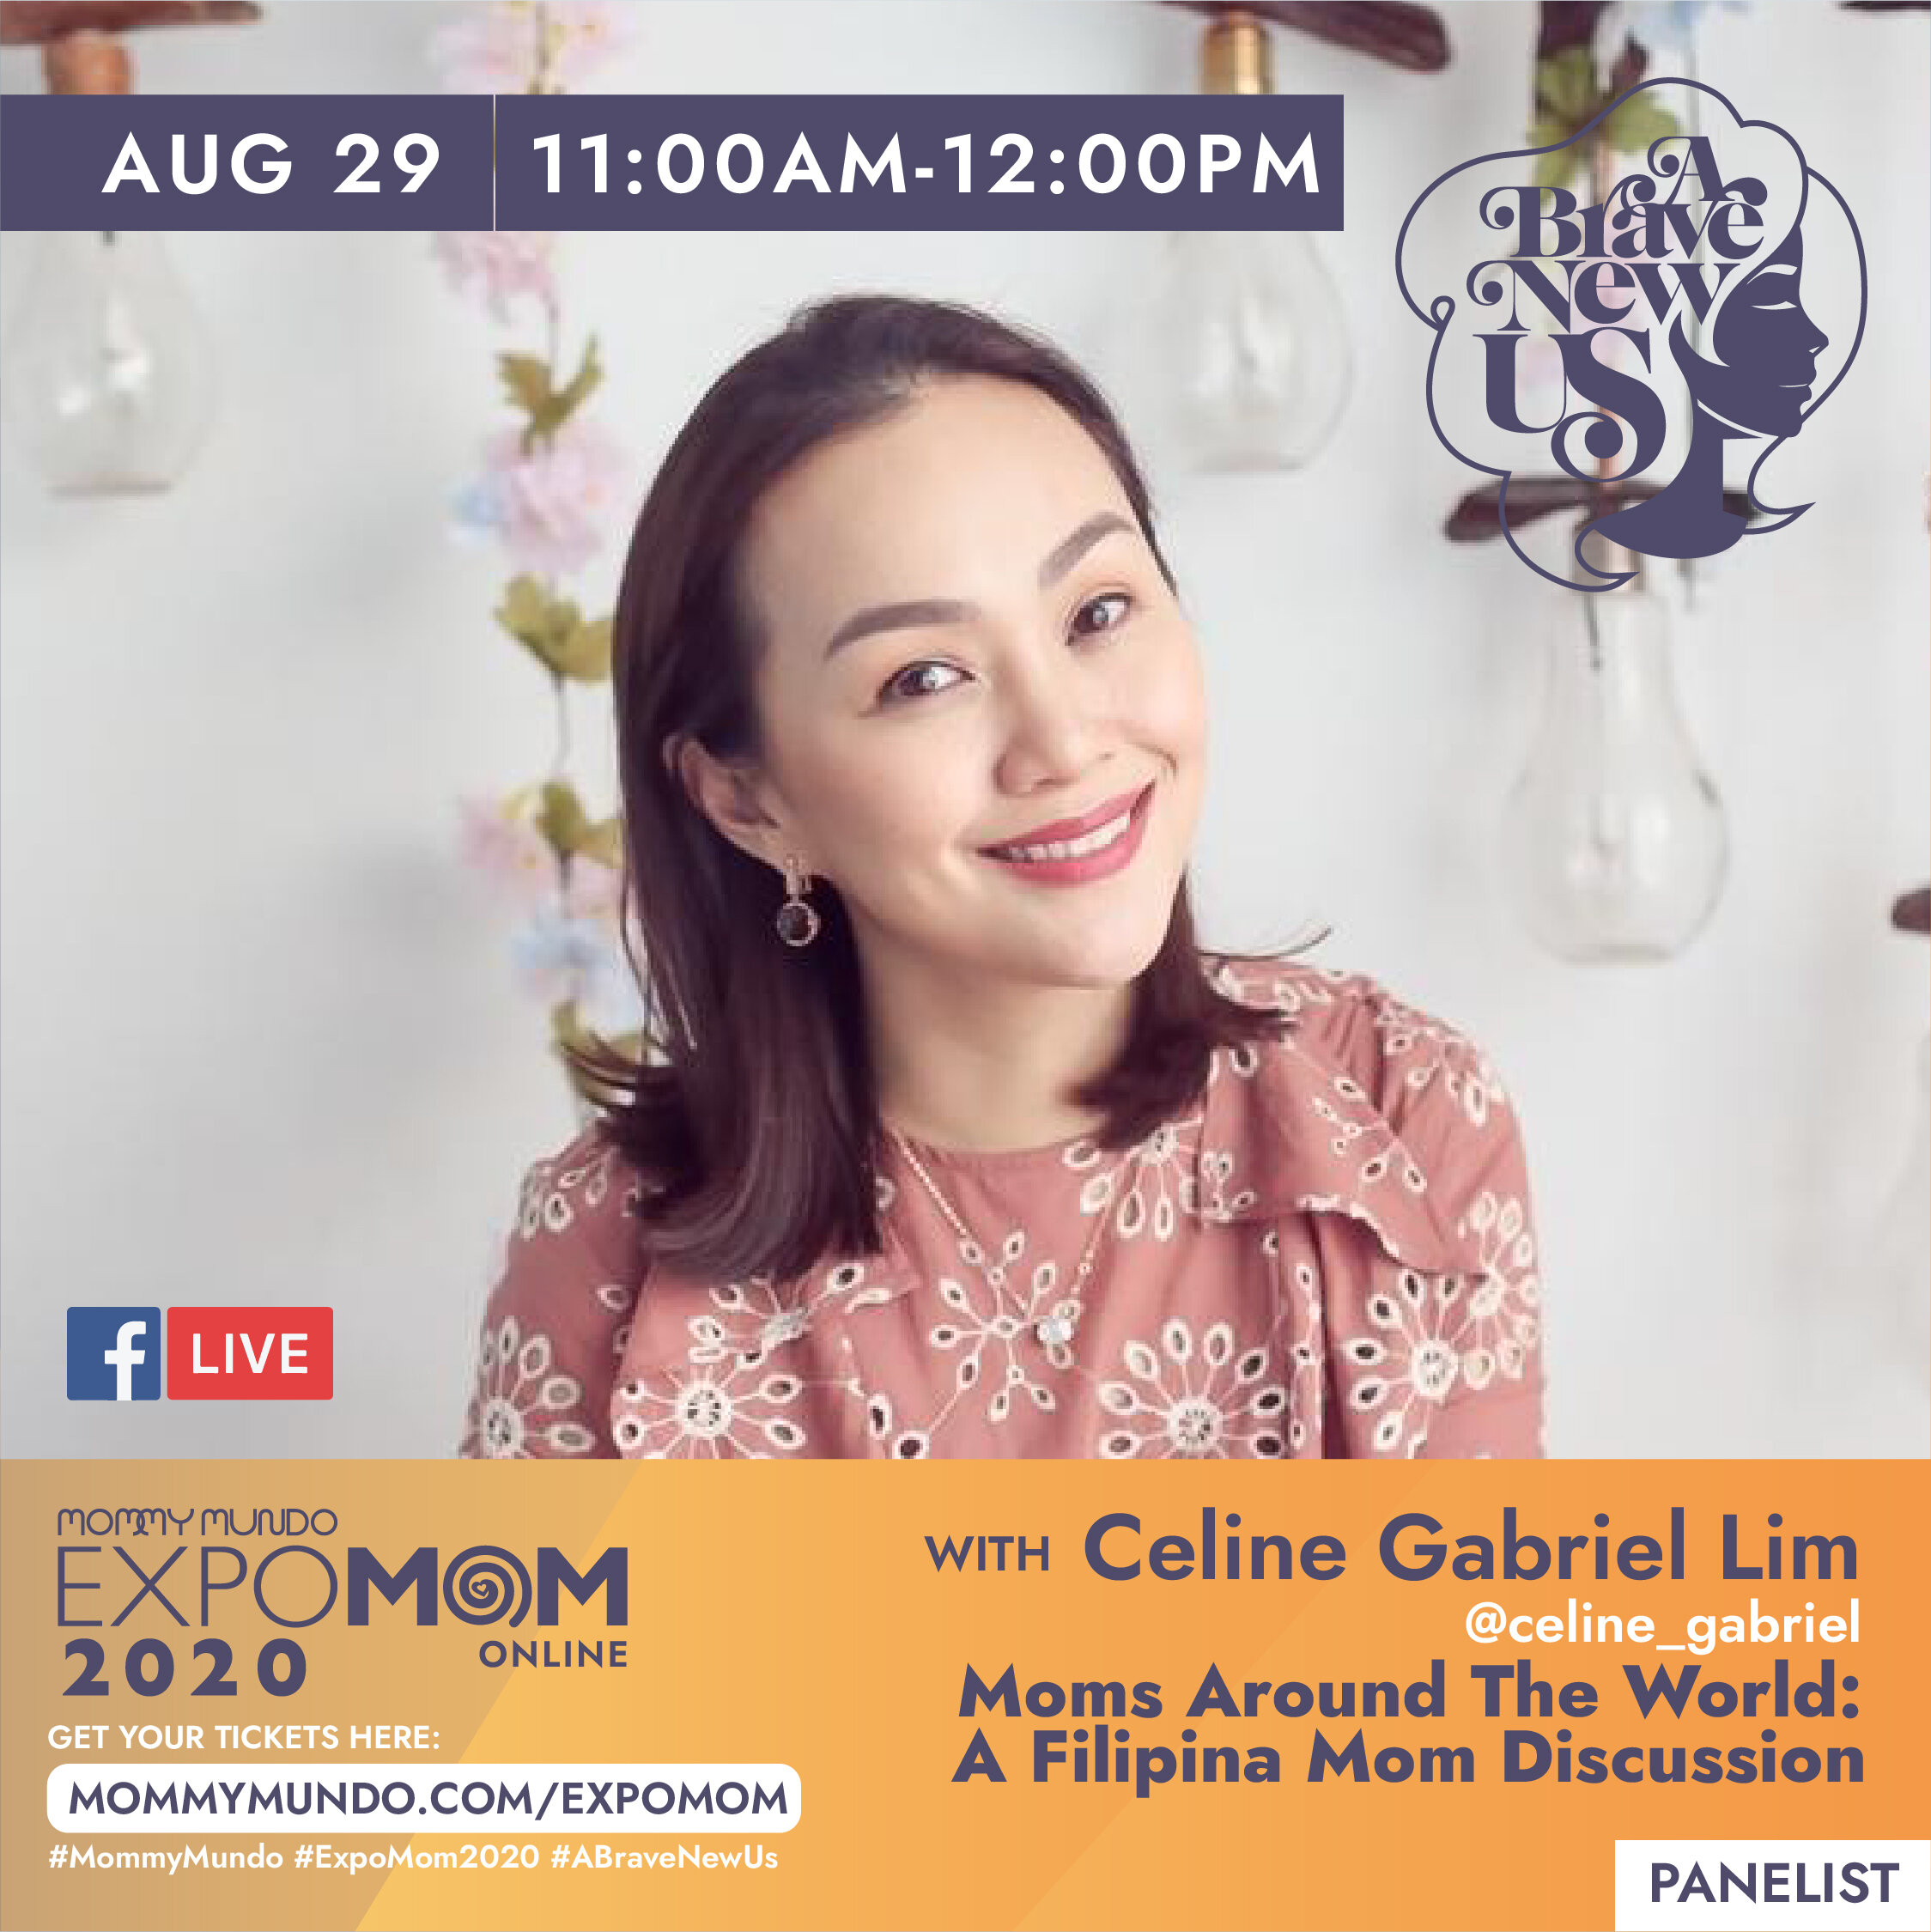  Celine Gabriel-Lim is a Public Relations Professional, who wears as many hats as her schedule allows. She is the savvy retailer behind the popular healthy snack brand, Honest Junk (@honestjunk) and anti-mosquito cult favourite, Kiele Naturals (kiele